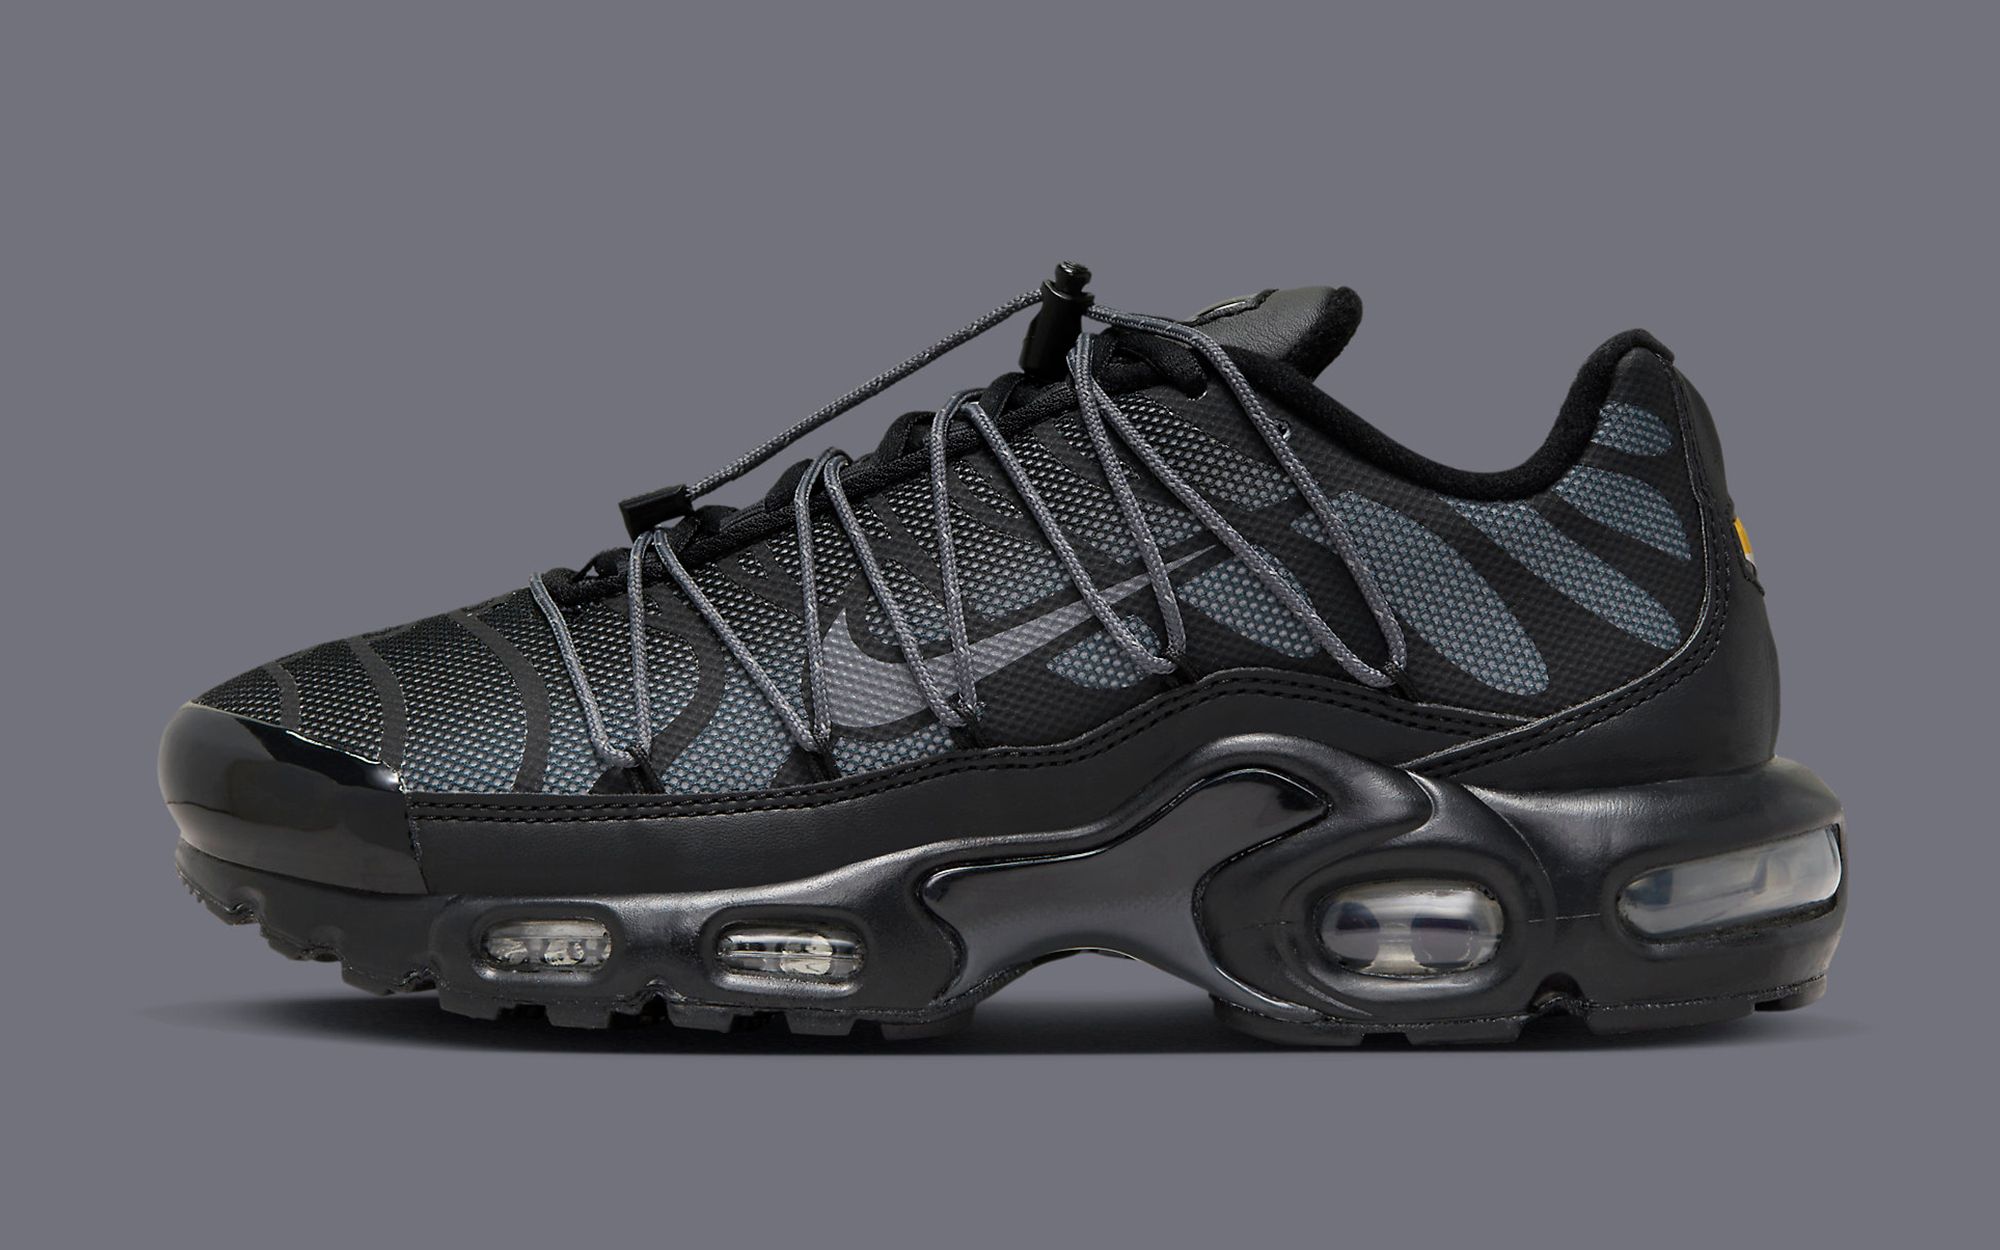 Nike TN Air Max Plus Displays Reflective Uppers In Black And Red